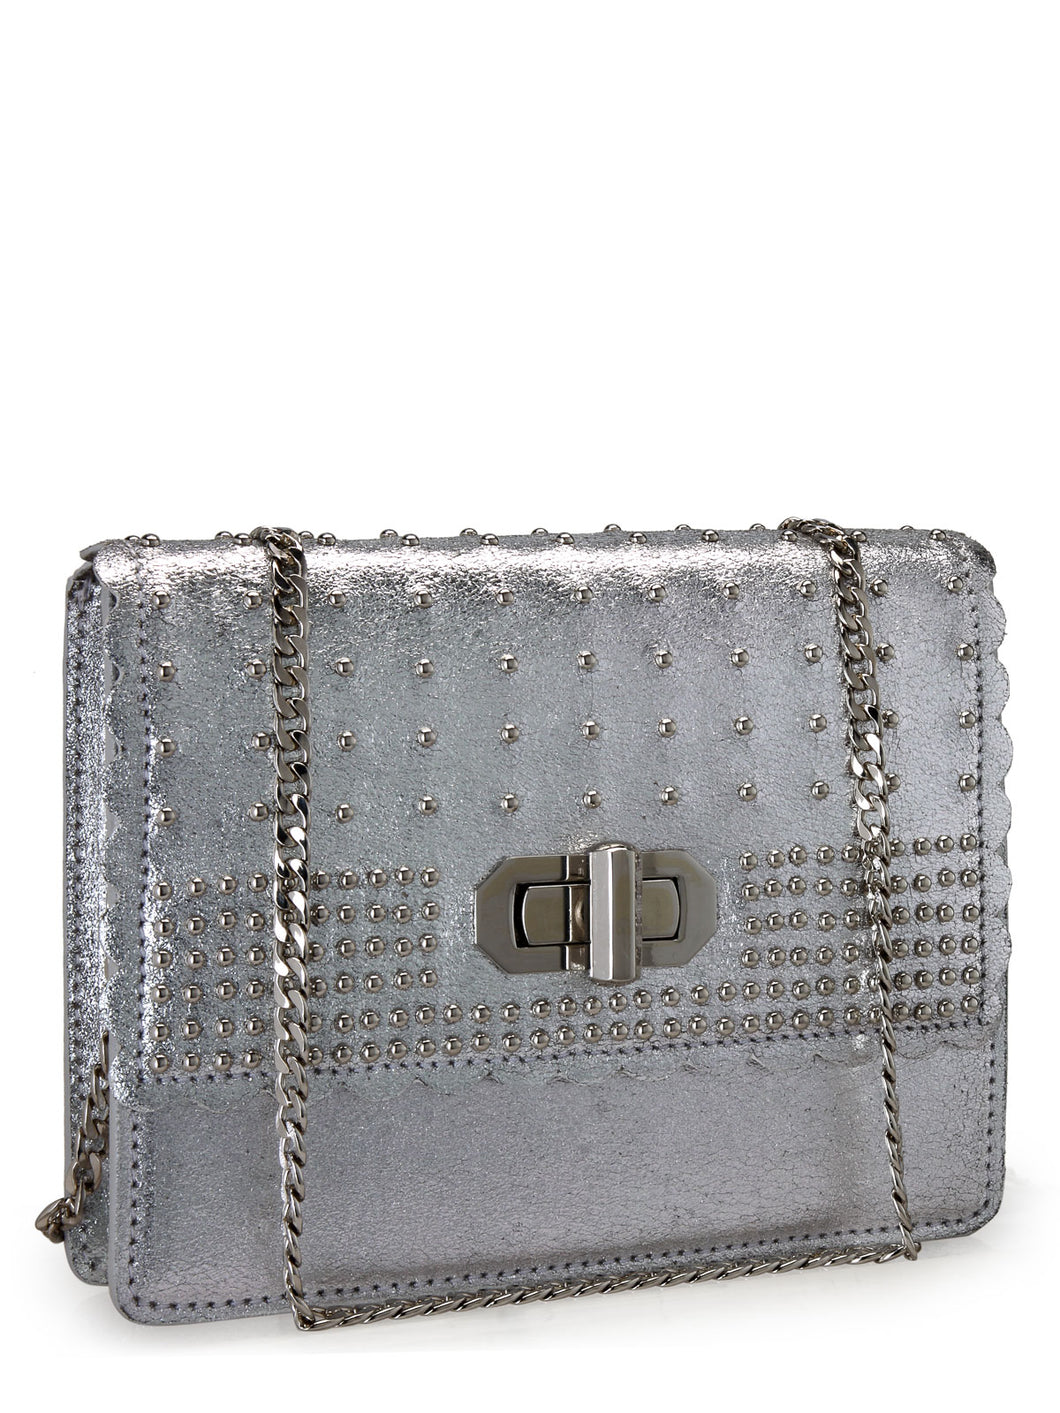 Studded Clutch In Metallic Crackle Leather